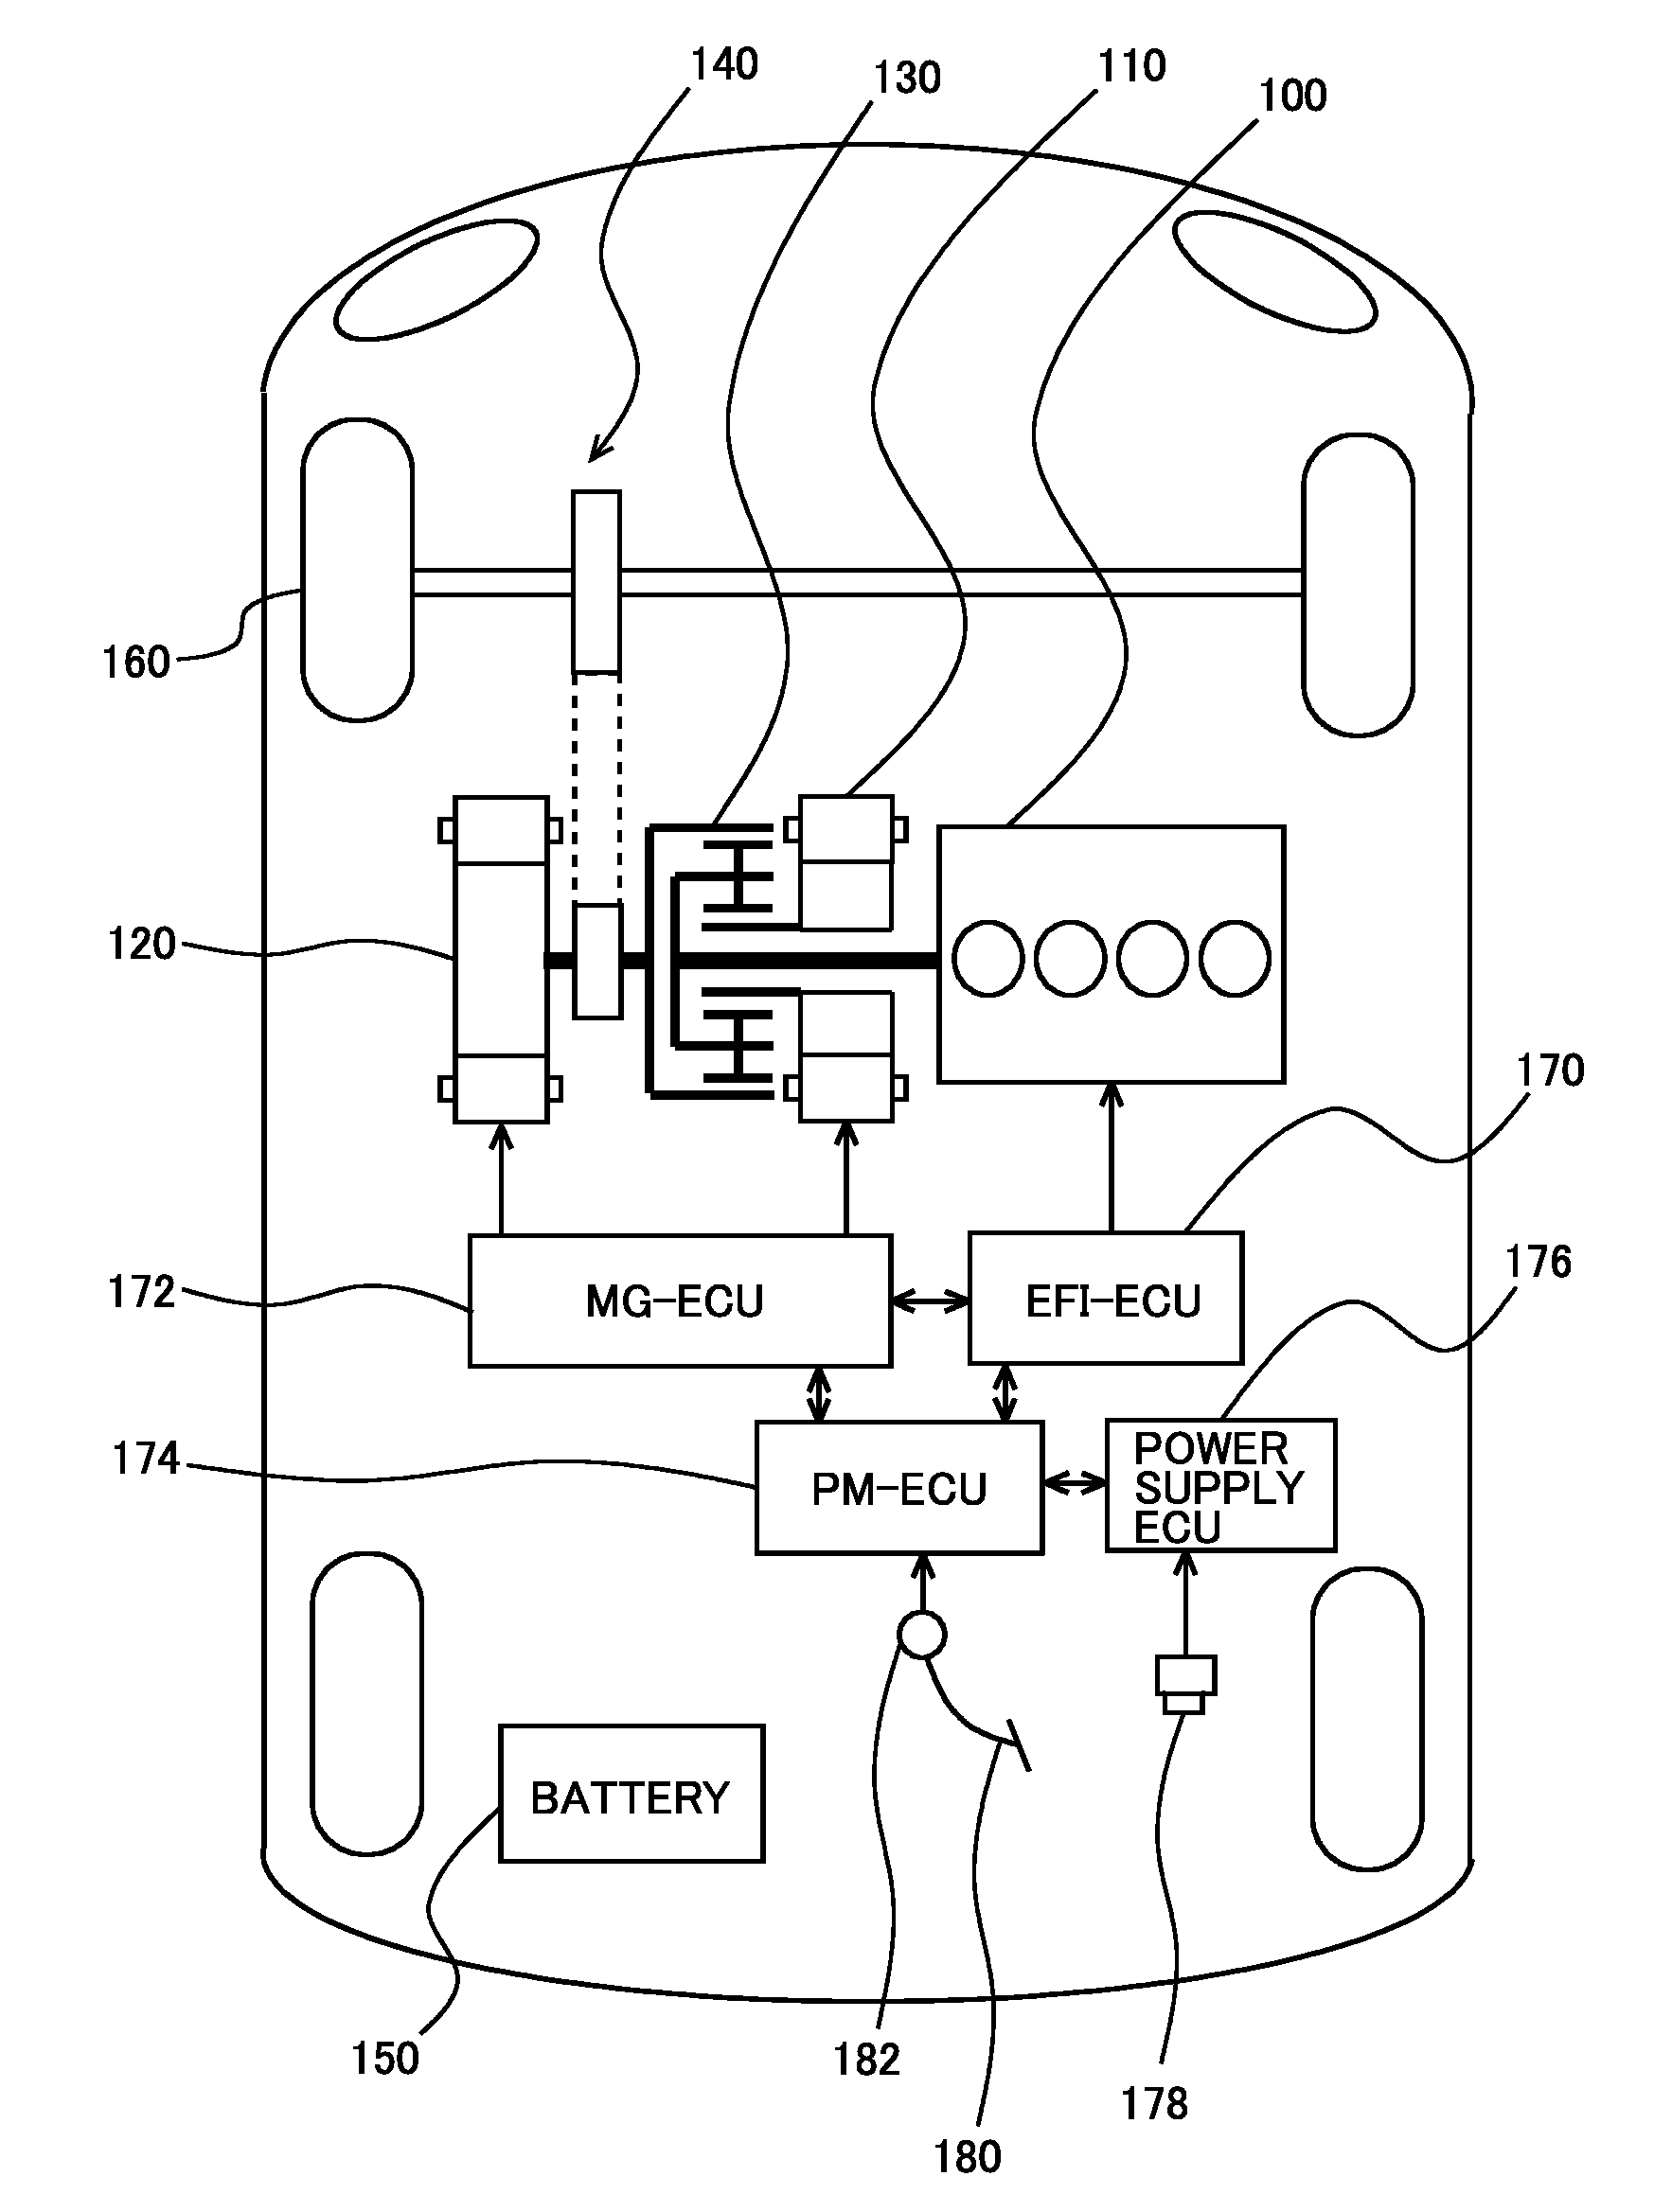 Control system of vehicle